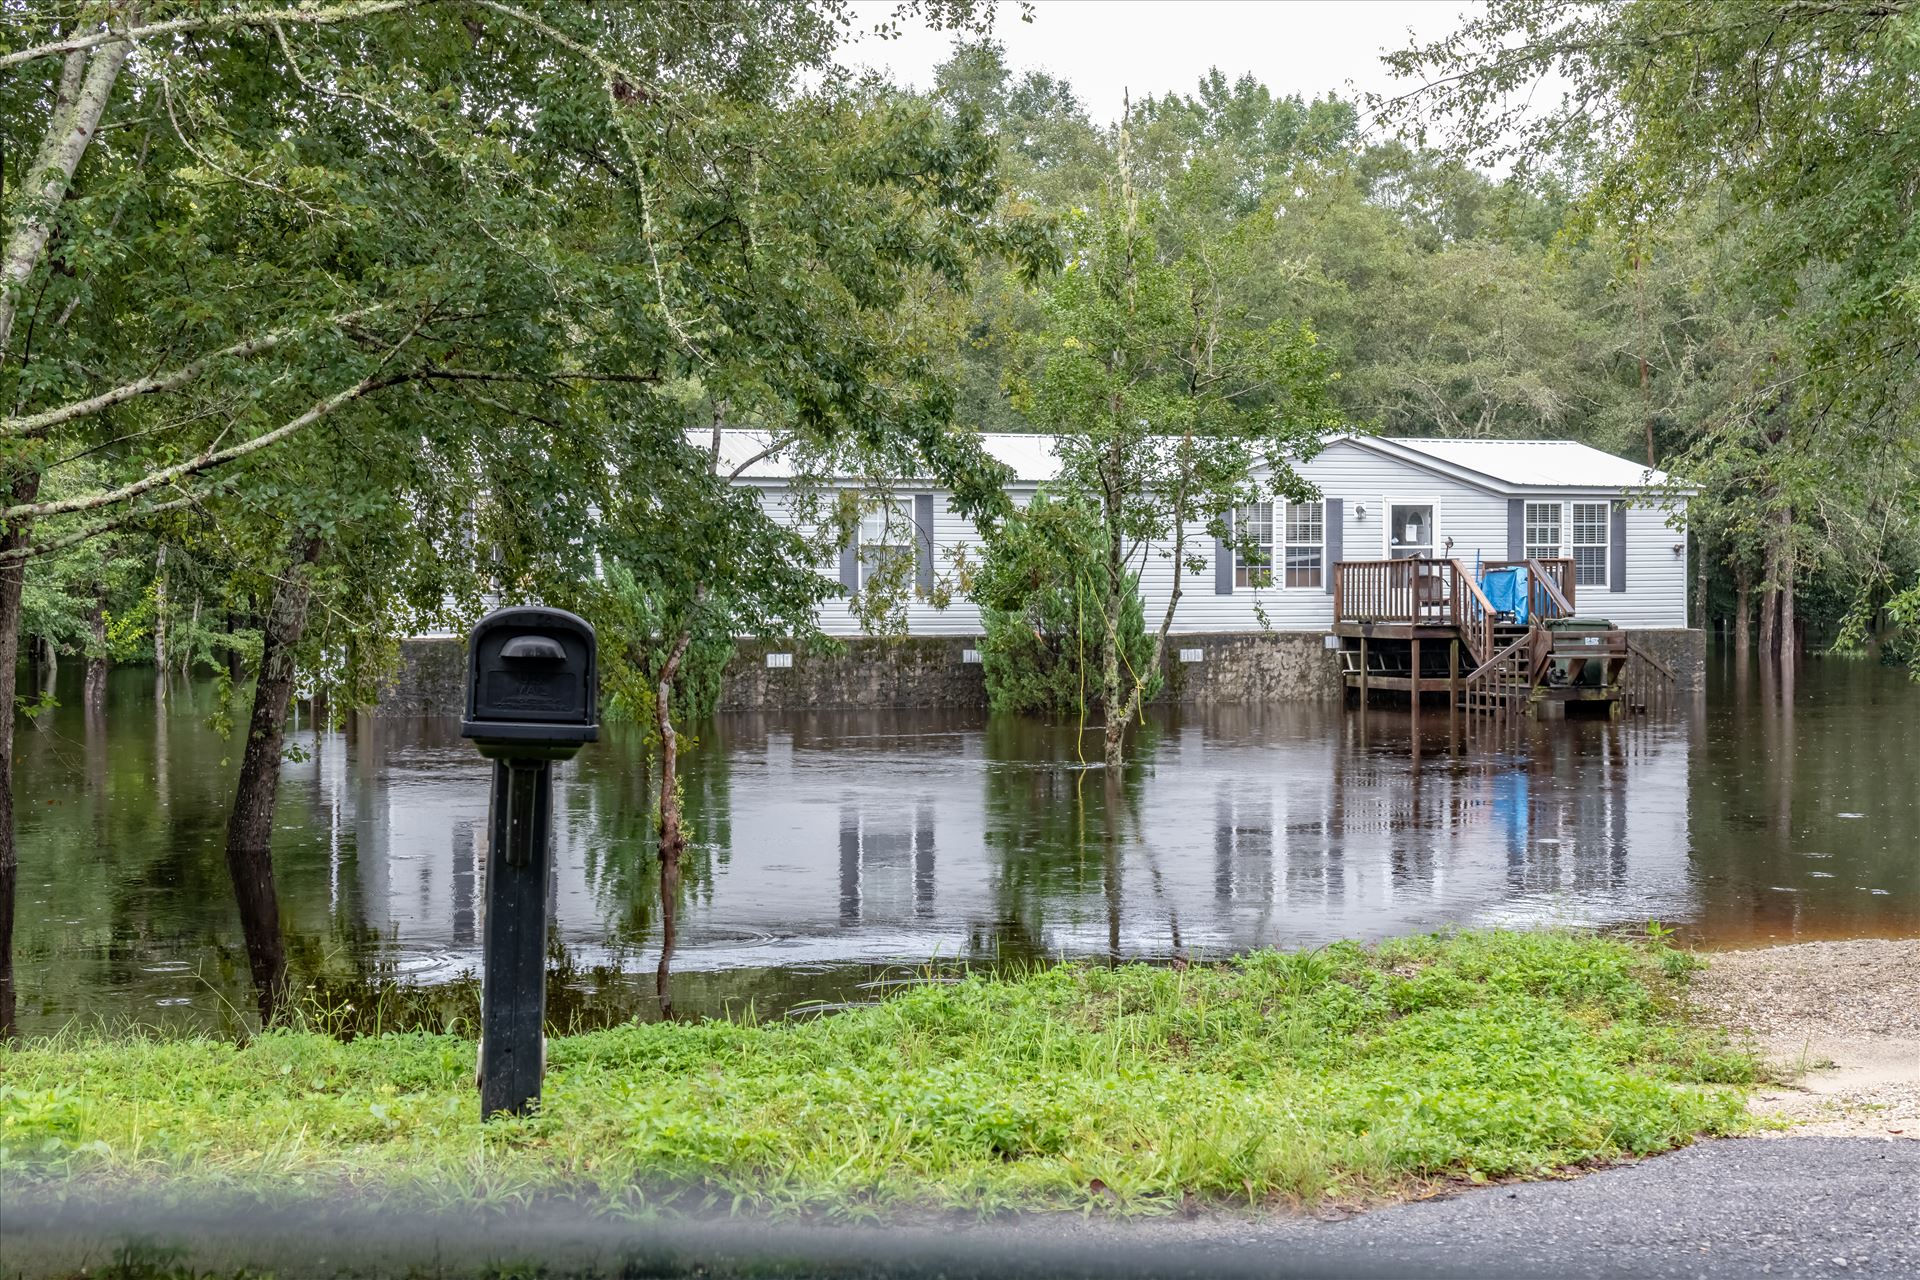 bear creek out of bank 7 August 02, 2018.jpg August 02, 2018 heavy rains flooded many parts of Bay County, Florida. This photo is in the Bear Creek area. by Terry Kelly Photography